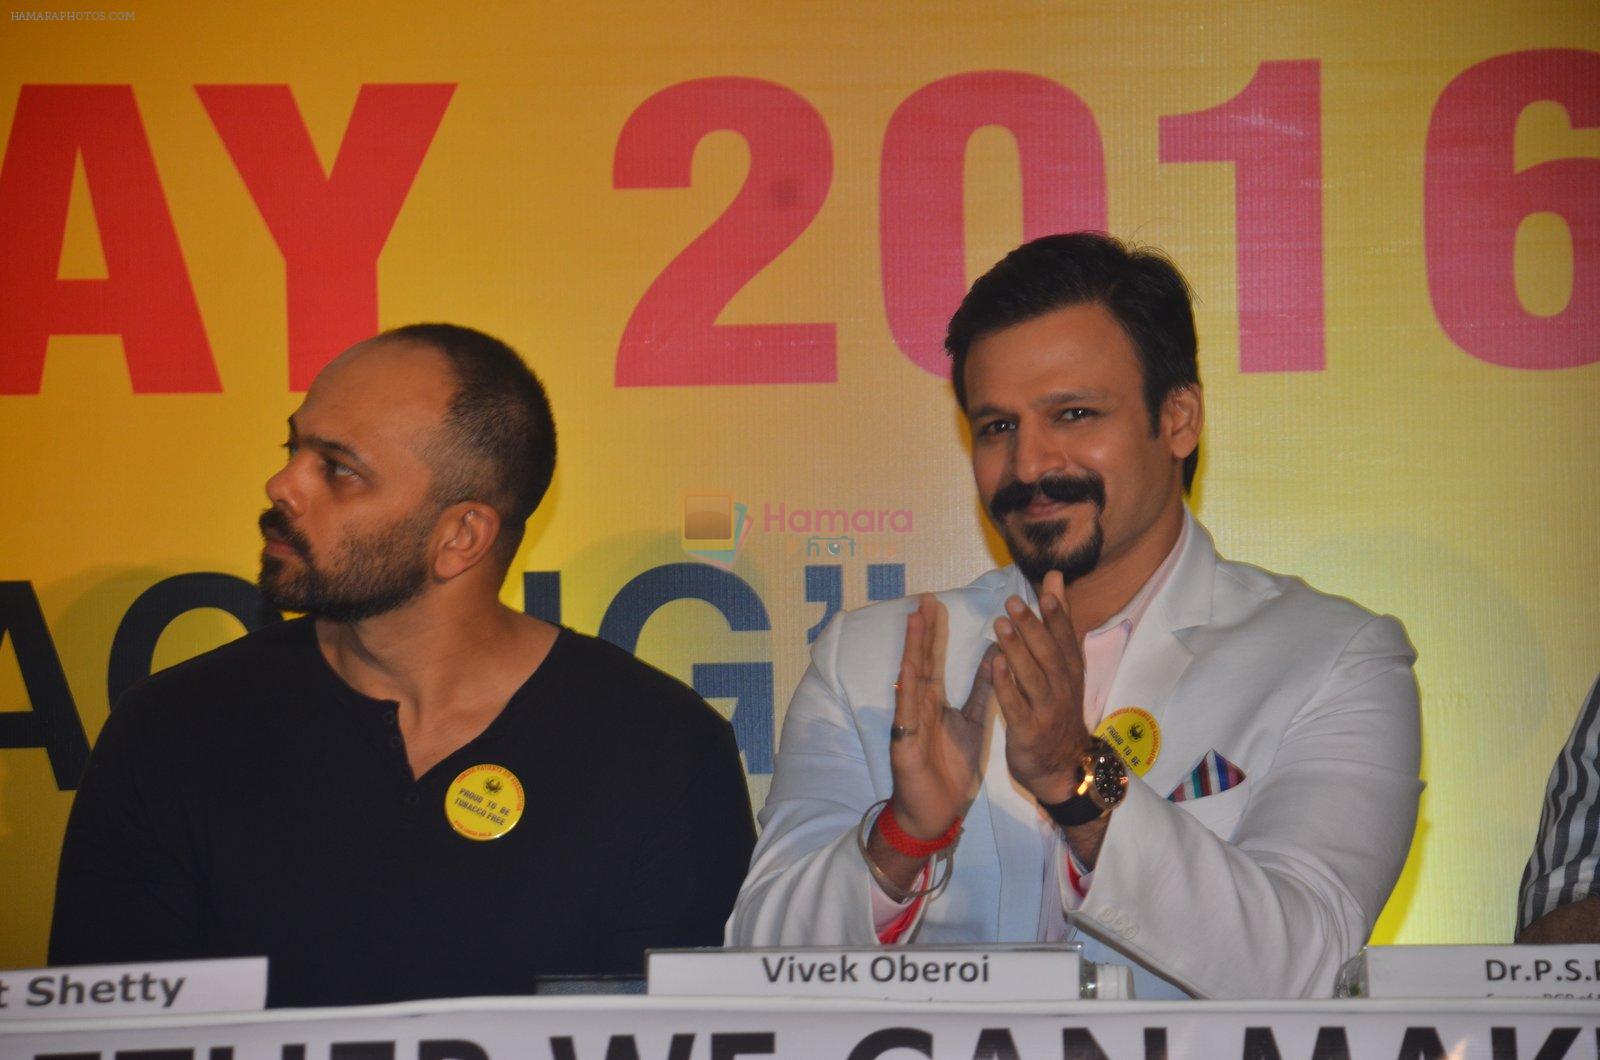 Vivek Oberoi and Rohit Shetty at an event to support fight against Tobacco and Cancer and the cause in Mumbai on 11th June 2016